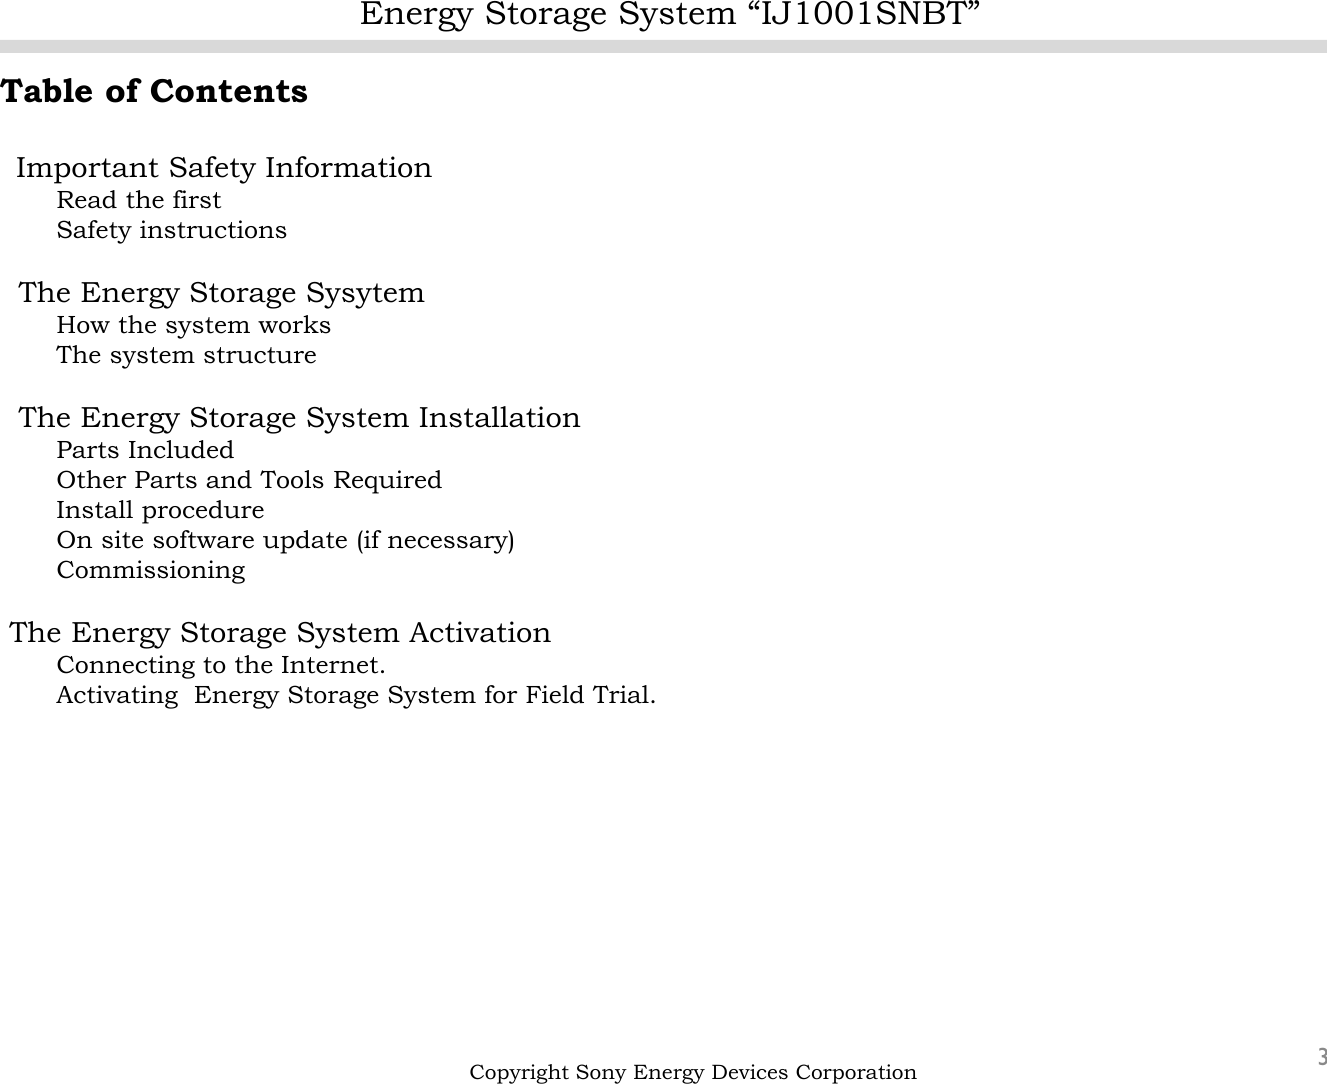 Energy Storage System “IJ1001SNBT”3Table of ContentsImportant Safety InformationRead the firstSafety instructionsThe Energy Storage SysytemHow the system worksThe system structureThe Energy Storage System Installation Parts IncludedOther Parts and Tools RequiredInstall procedureOn site software update (if necessary)CommissioningThe Energy Storage System ActivationConnecting to the Internet.Activating  Energy Storage System for Field Trial.Copyright Sony Energy Devices Corporation